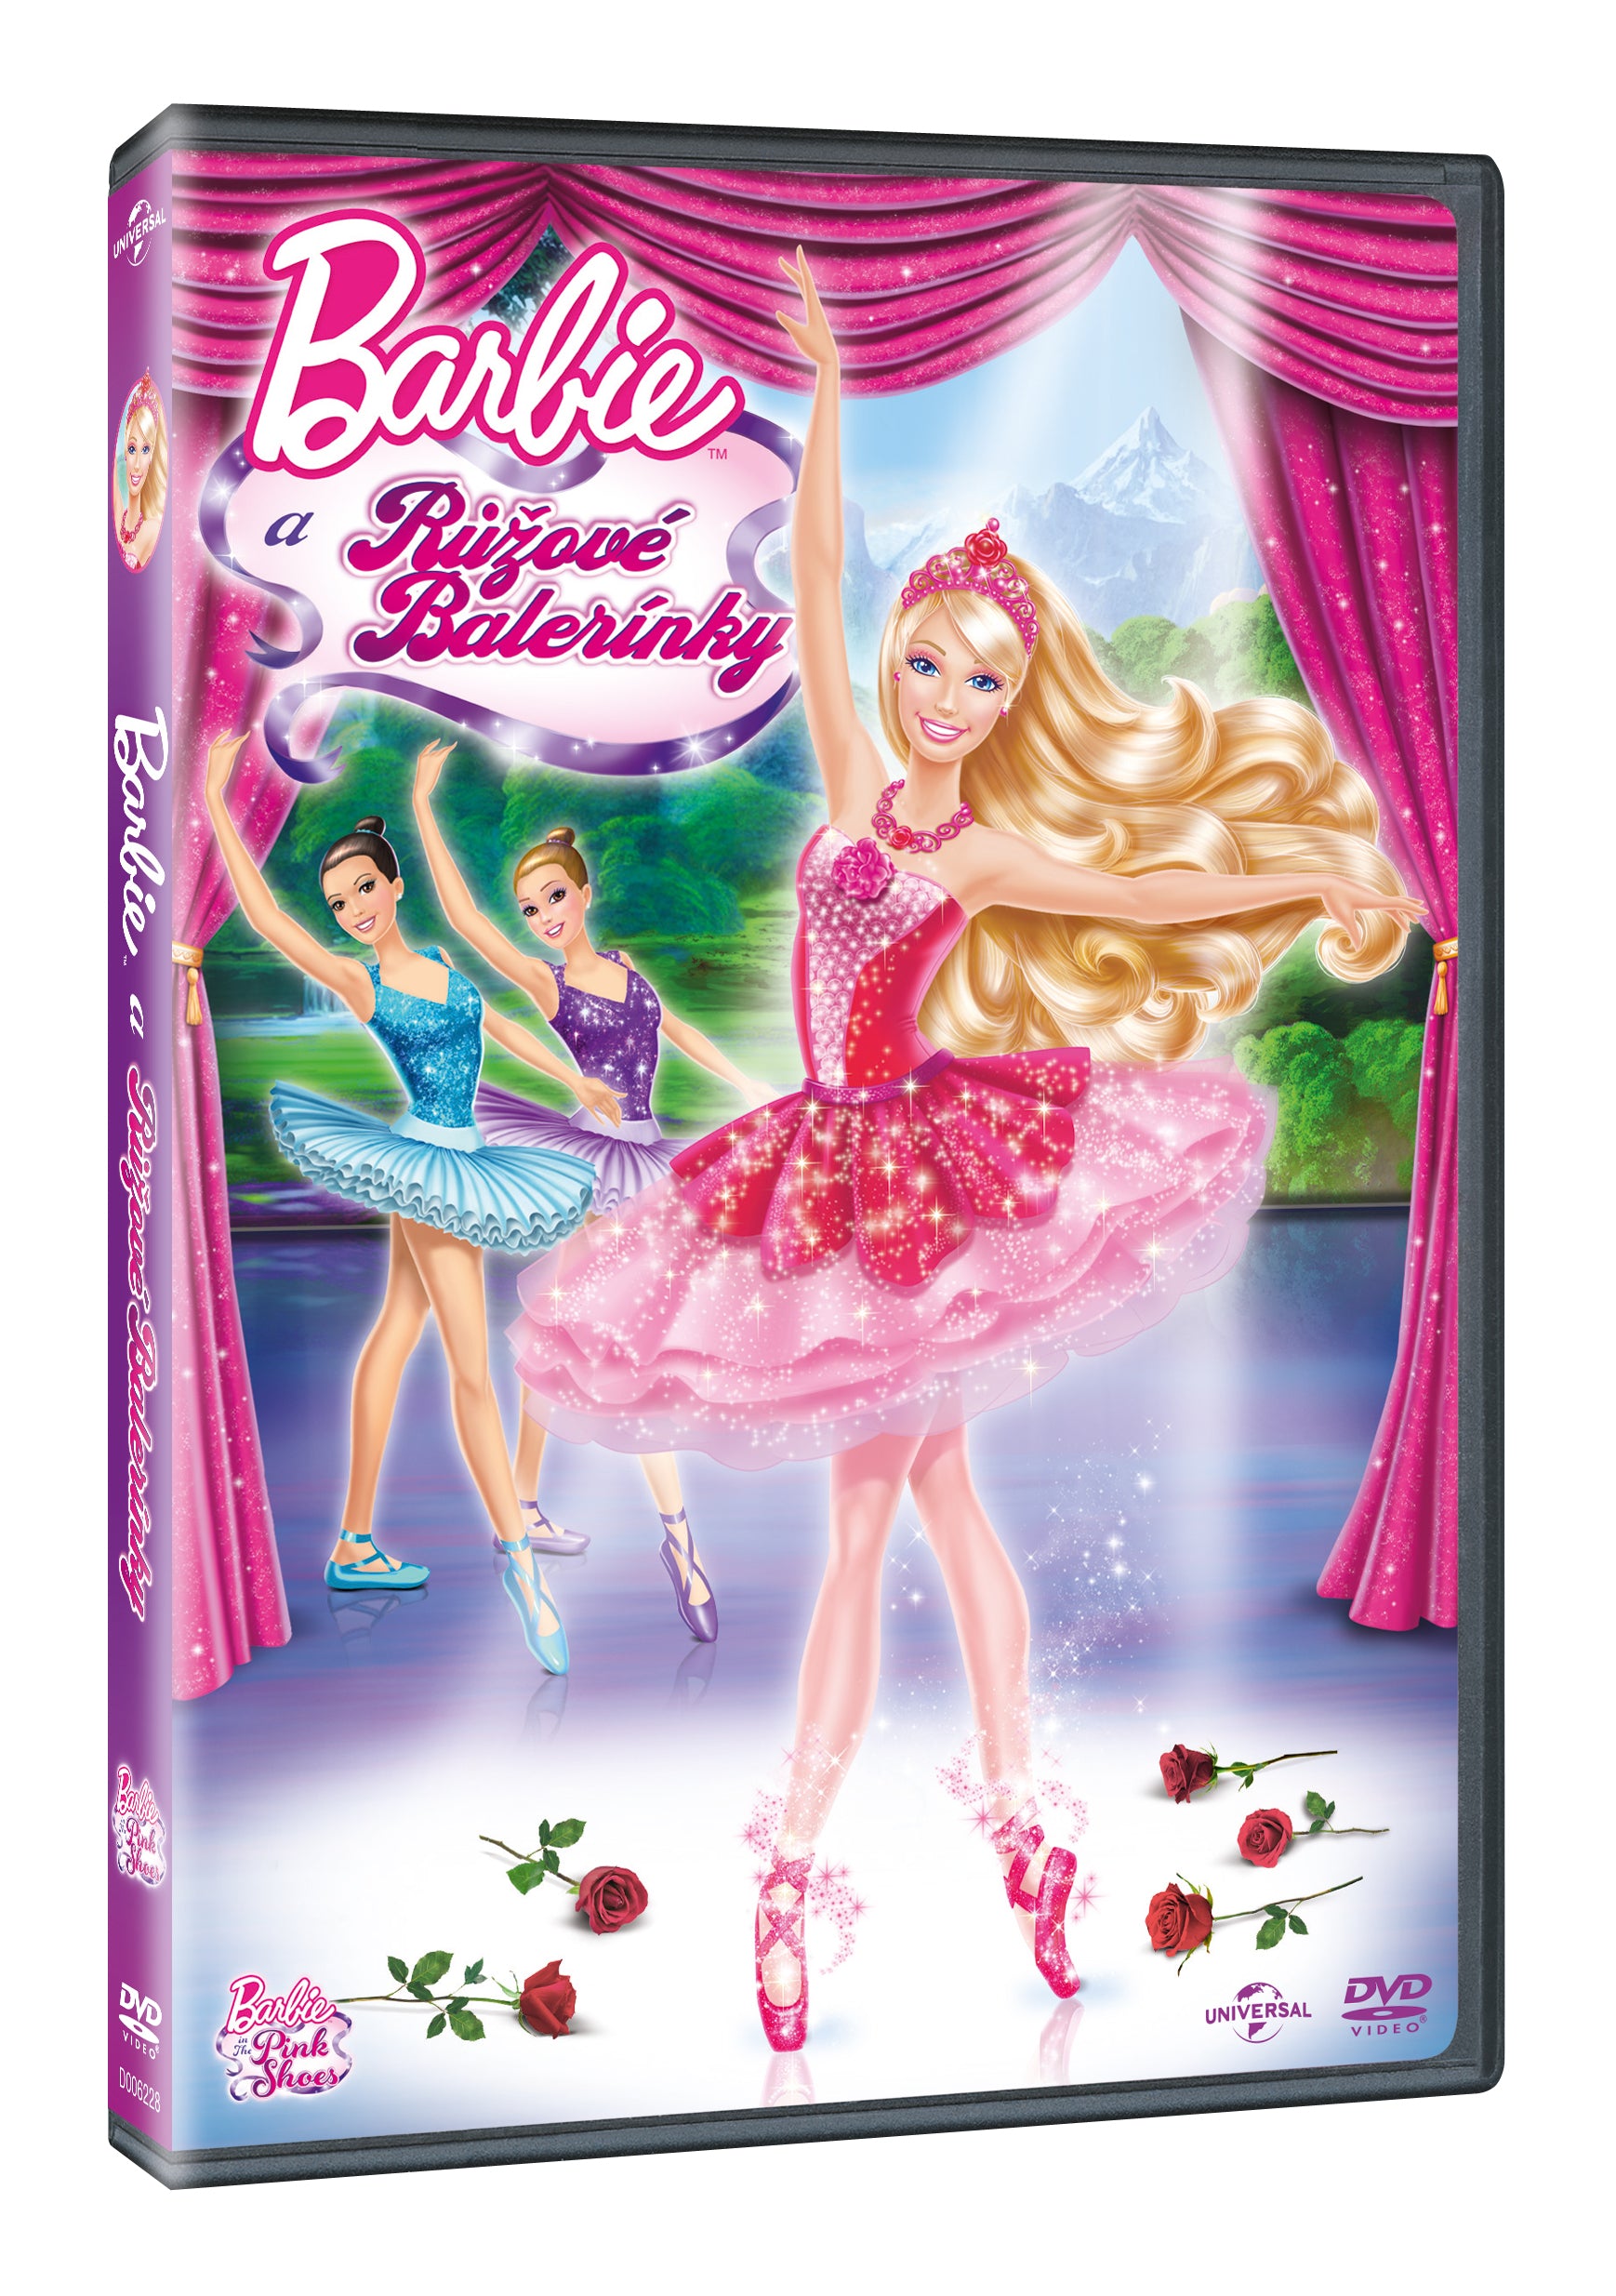 Barbie a Ruzove balerinky DVD / Barbie in the Pink Shoes